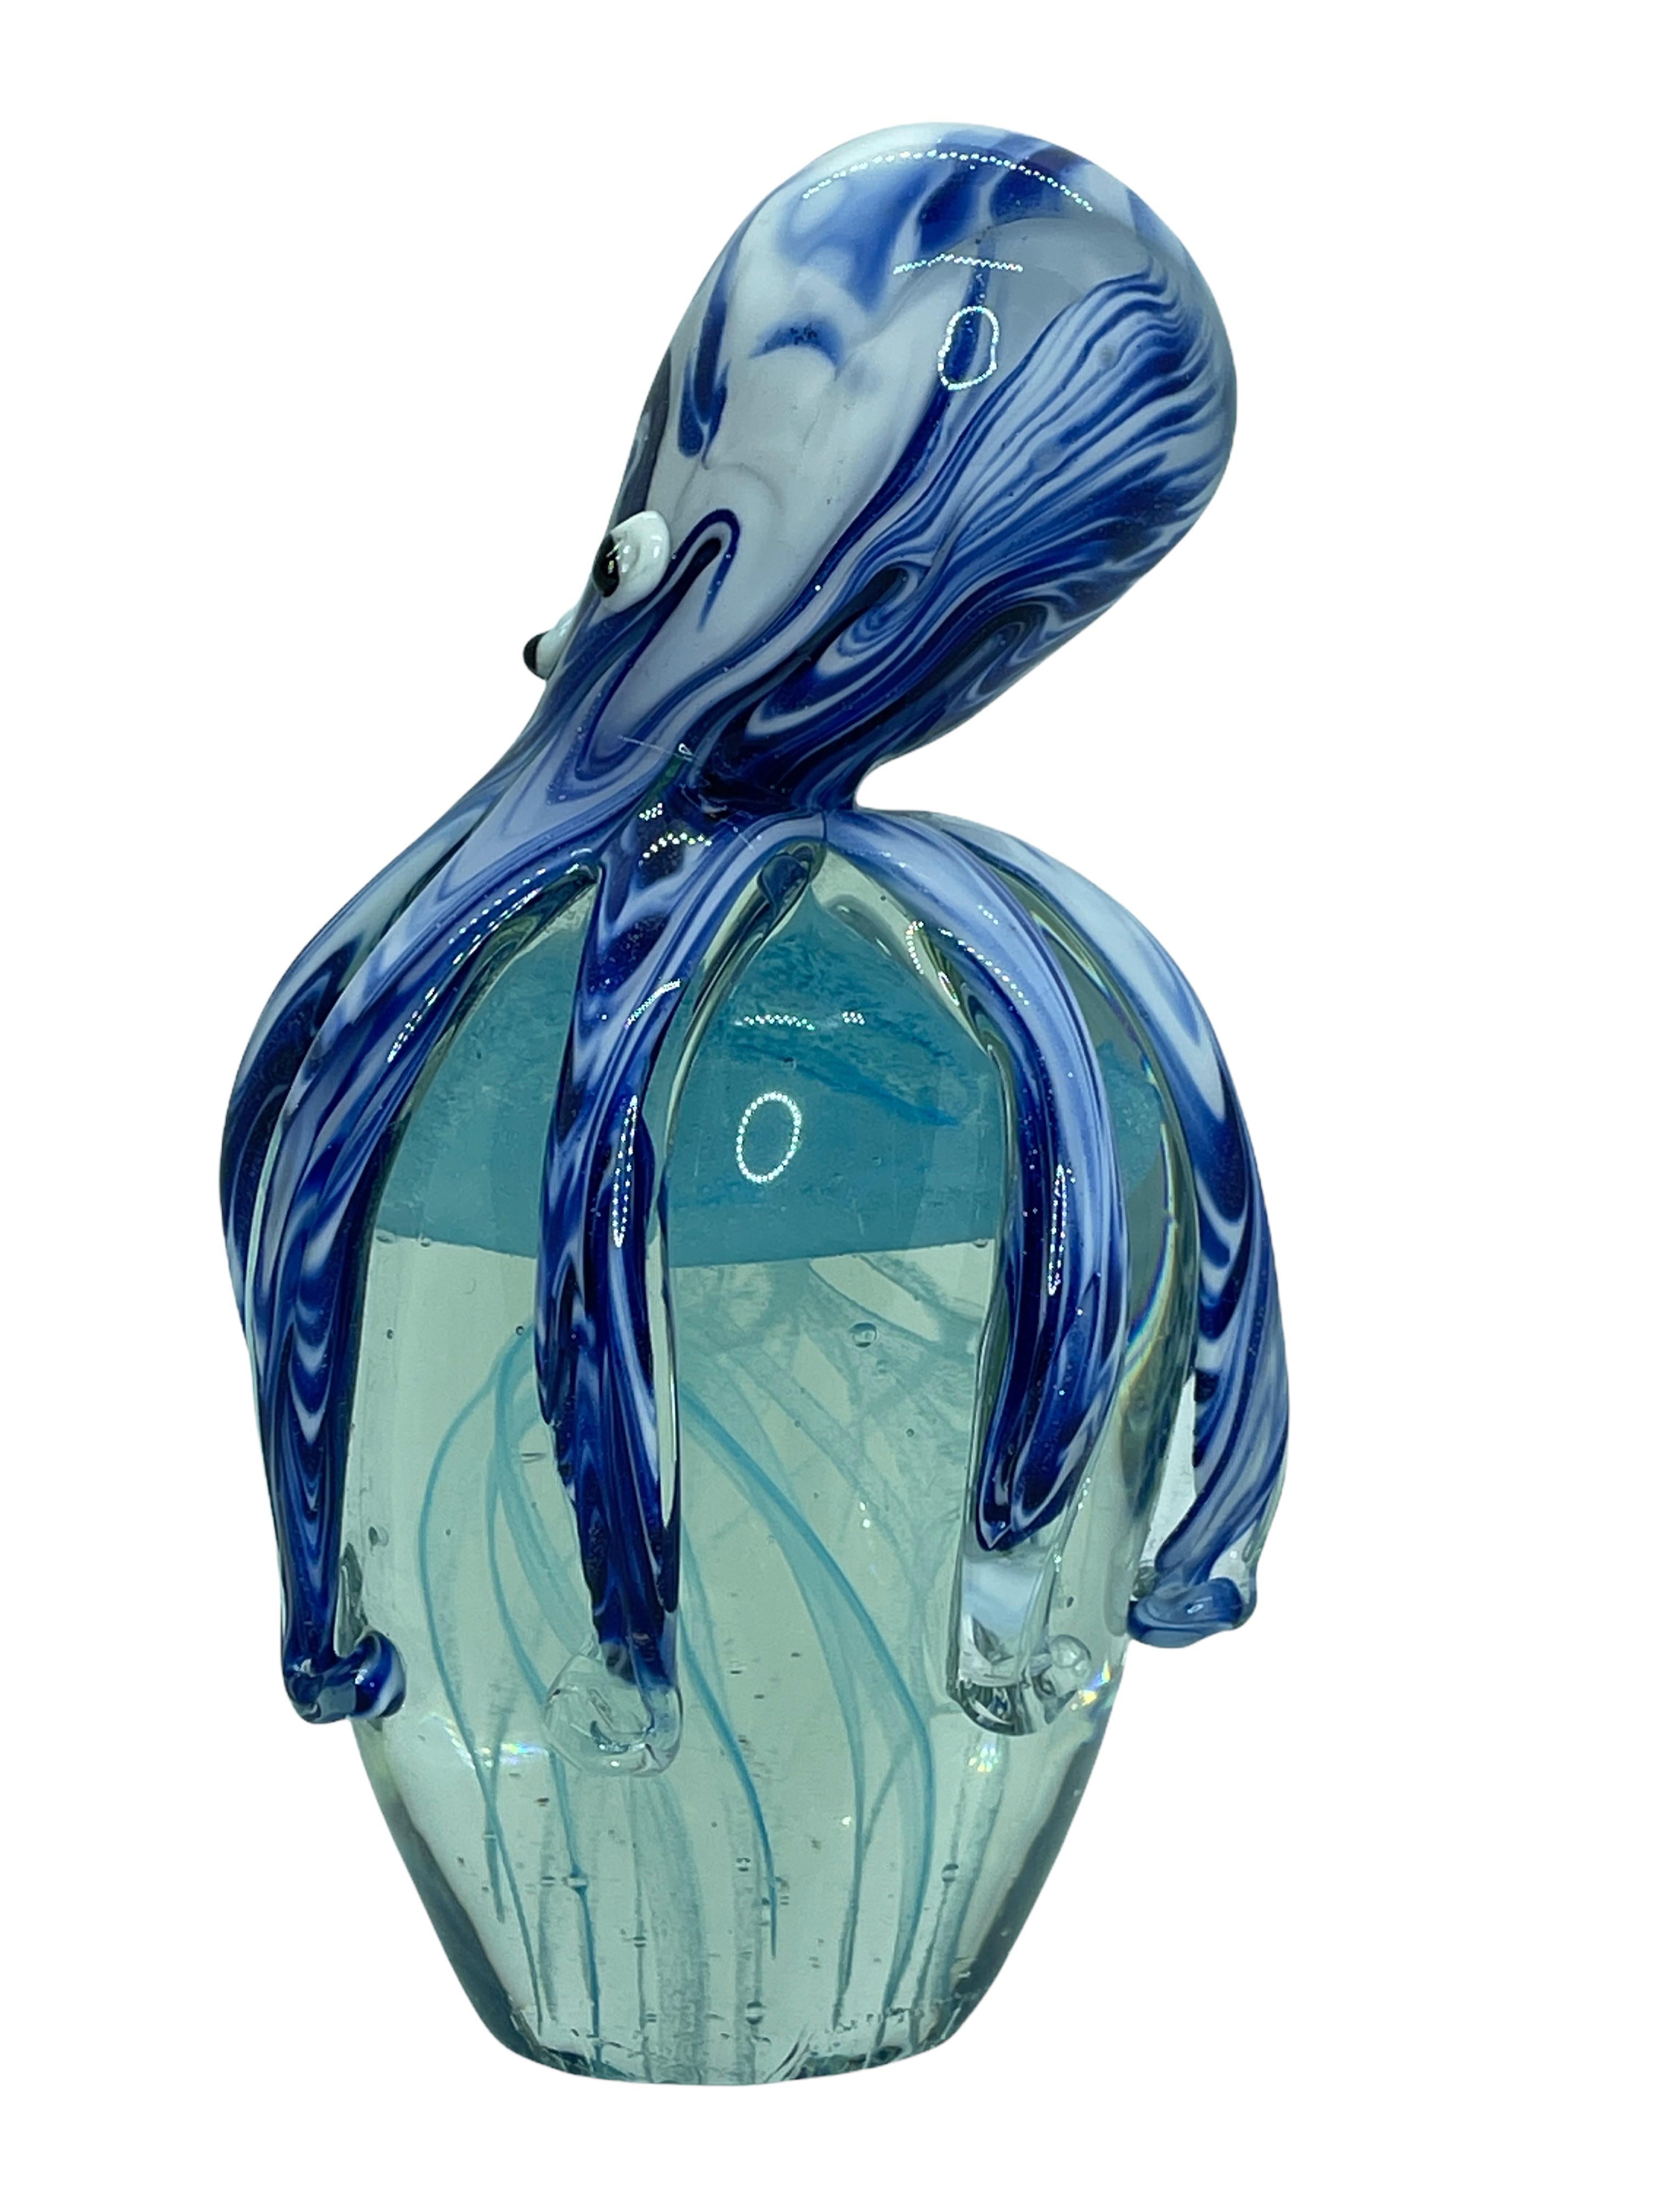 Beautiful Murano hand blown aquarium Italian art glass paper weight. Showing a octopus holding a jelly fish, underwater floating on controlled bubbles inside. Colors are a blue, white, black and clear. A beautiful nice addition to your desktop or as